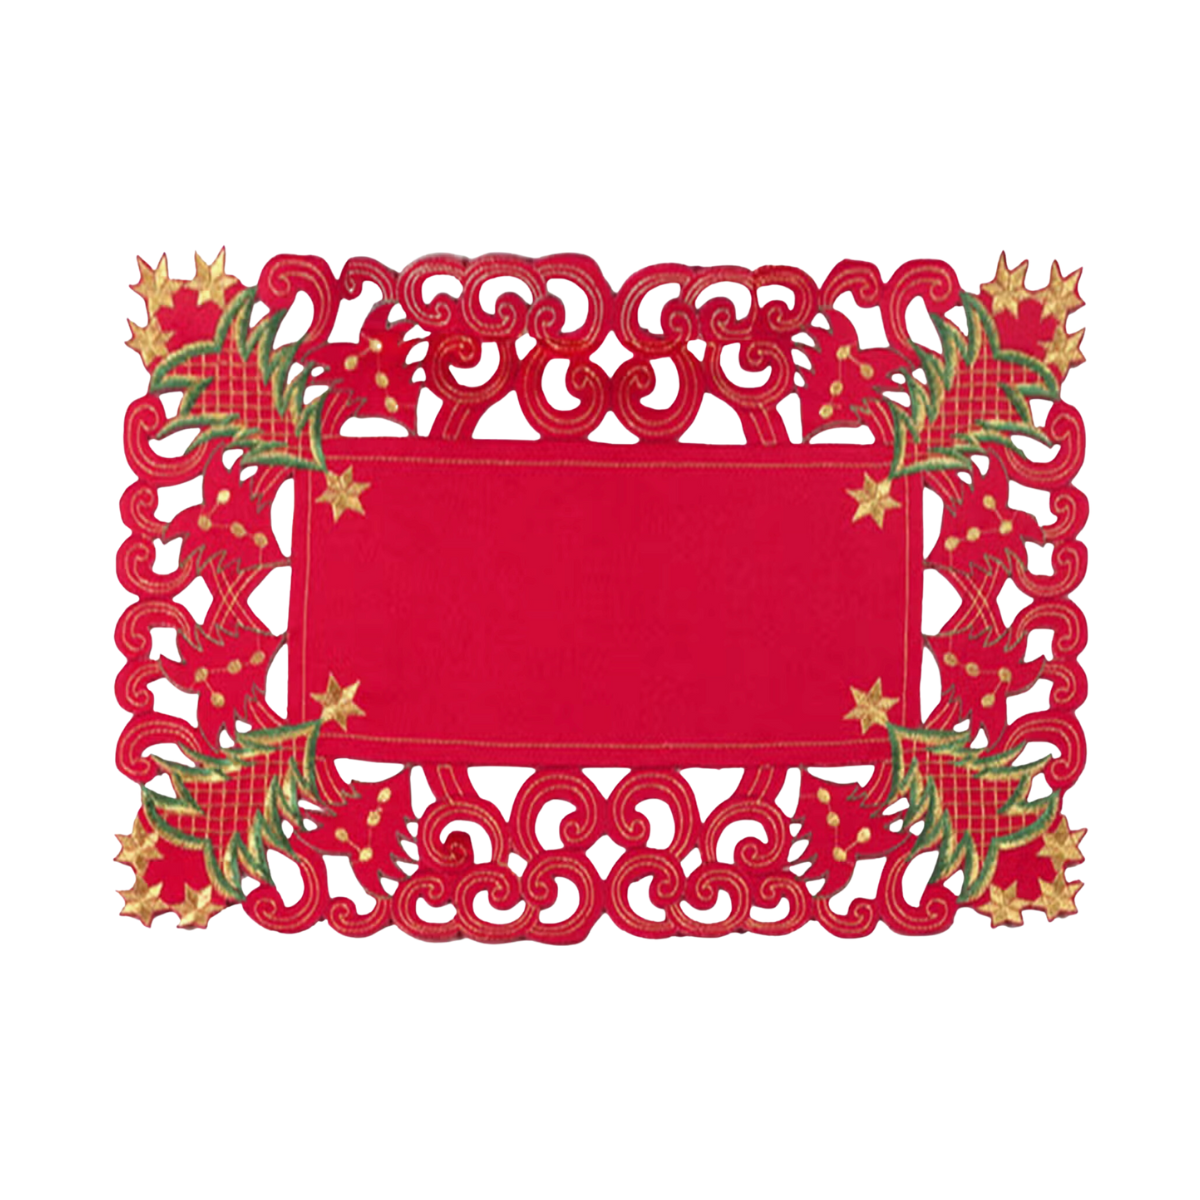 Red Embroidered Christmas Tree Cutout Placemat